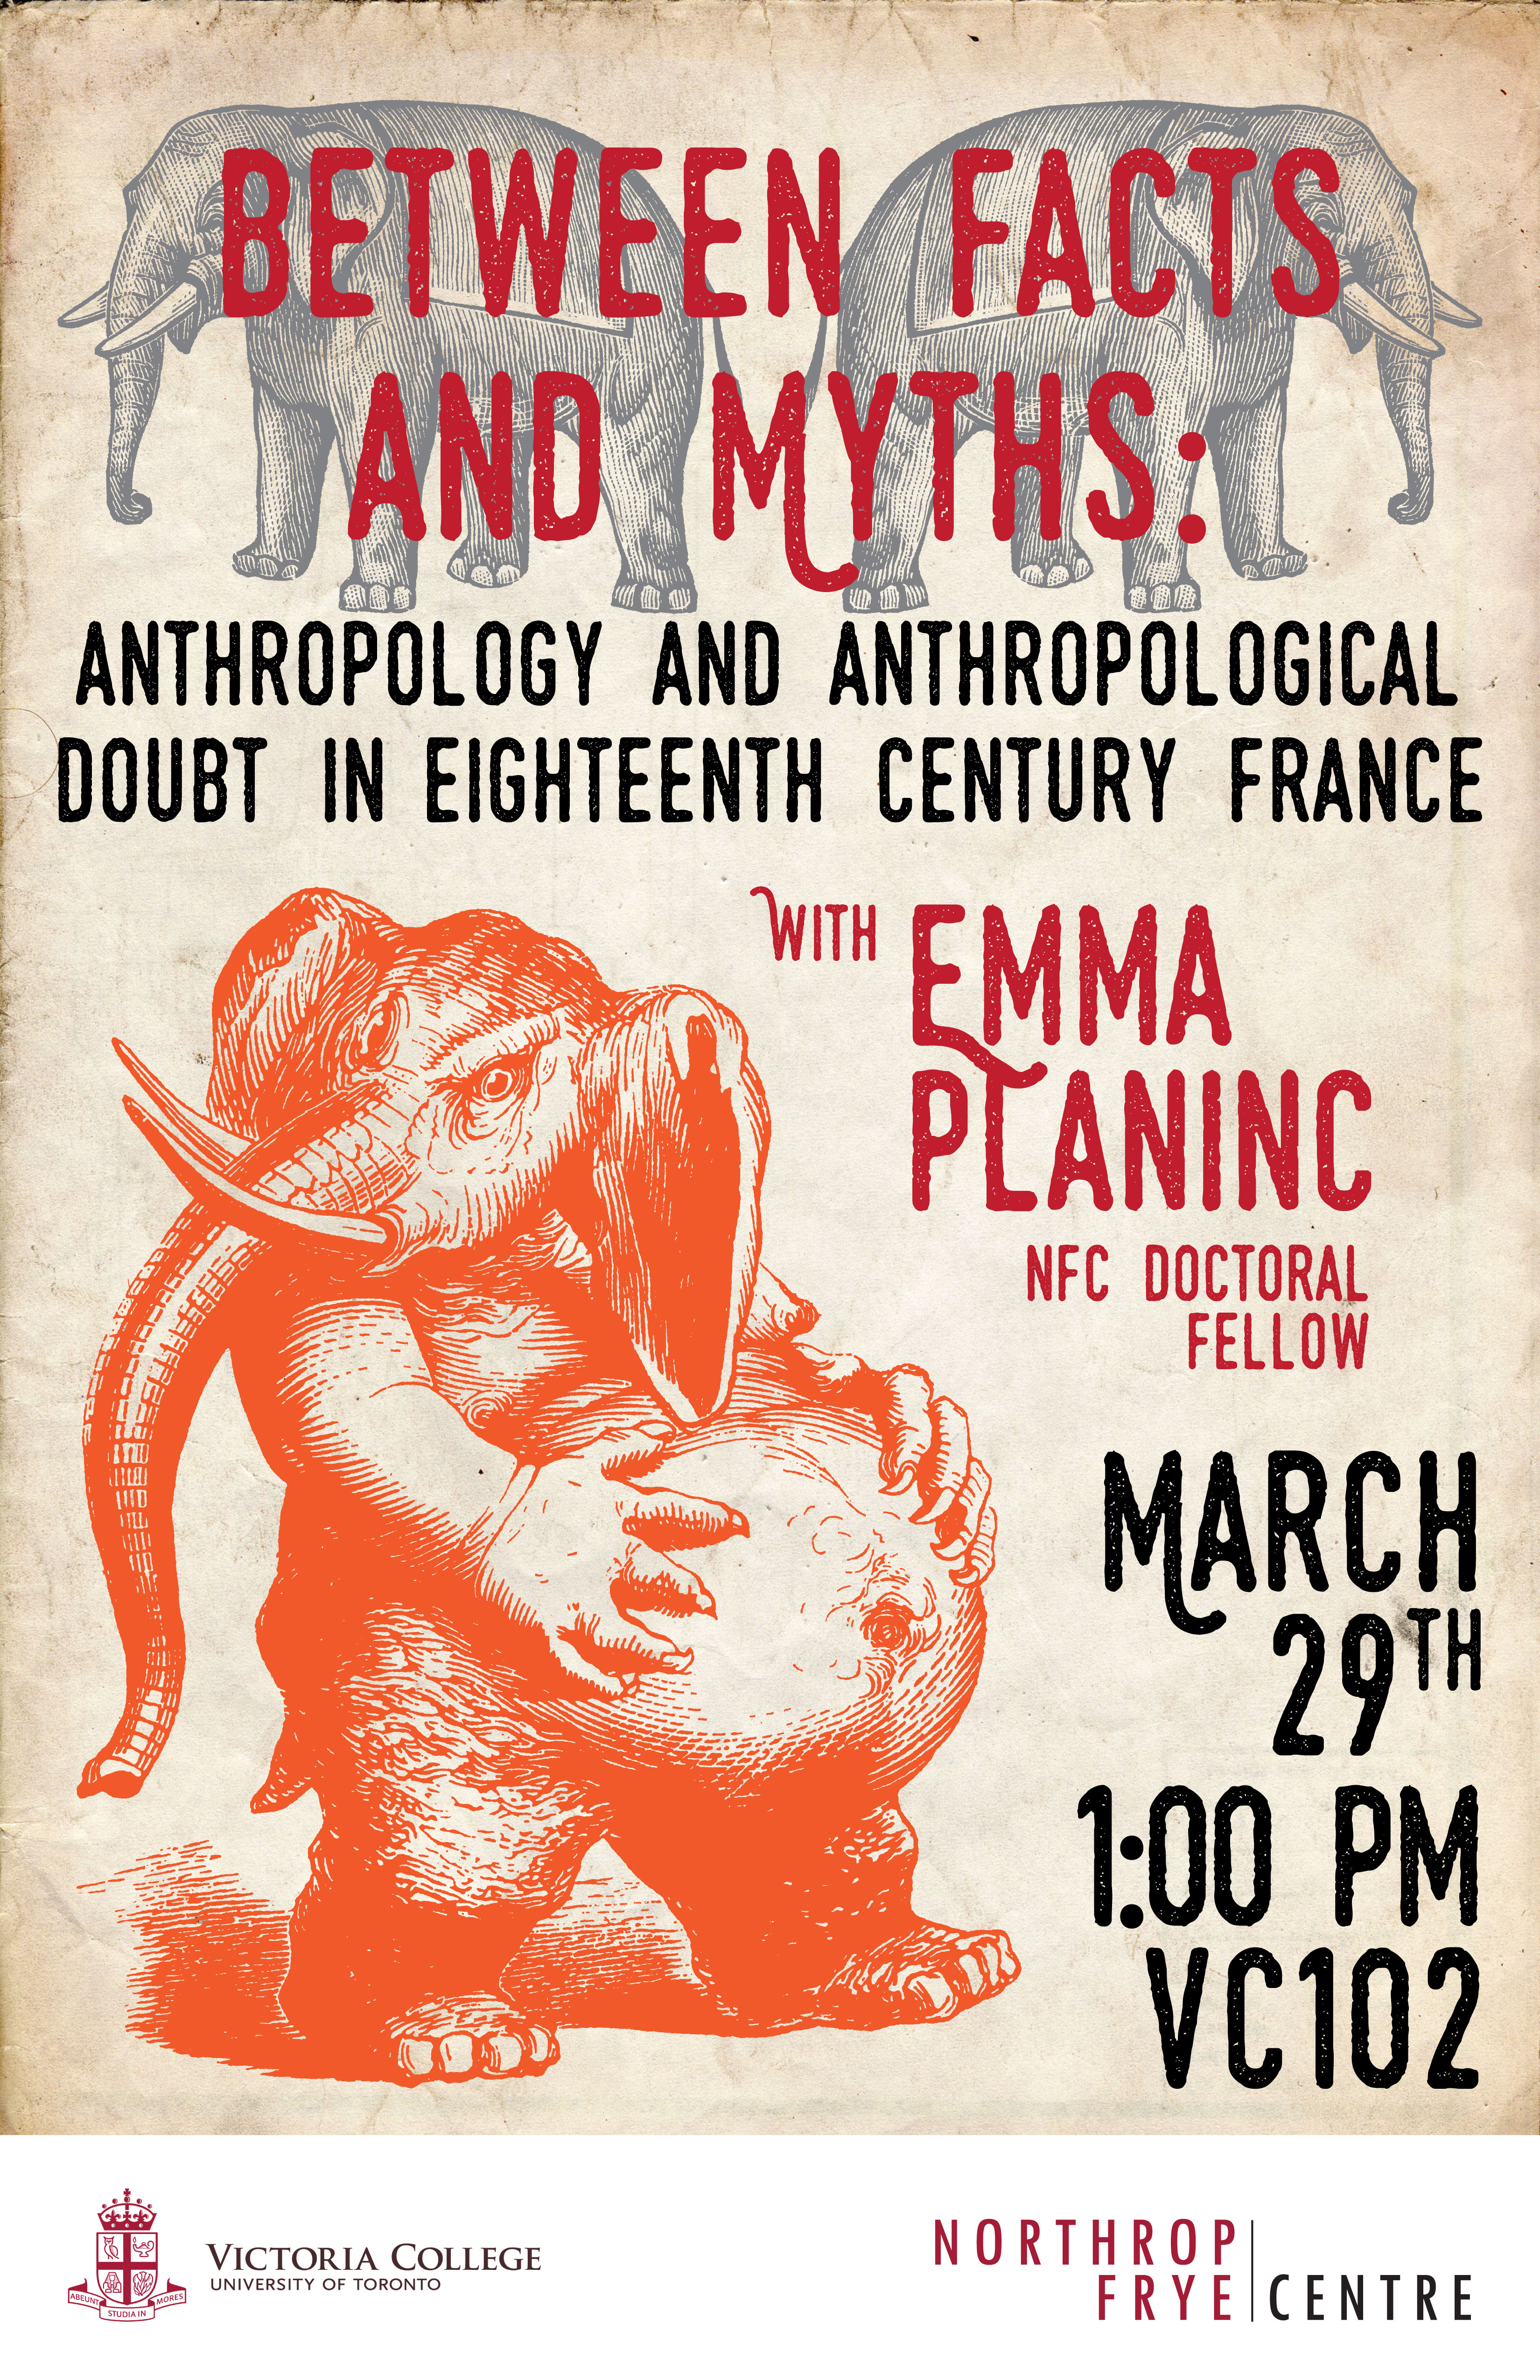 Mar. 29, 2016 | Between Facts and Myths | Emma Planinc